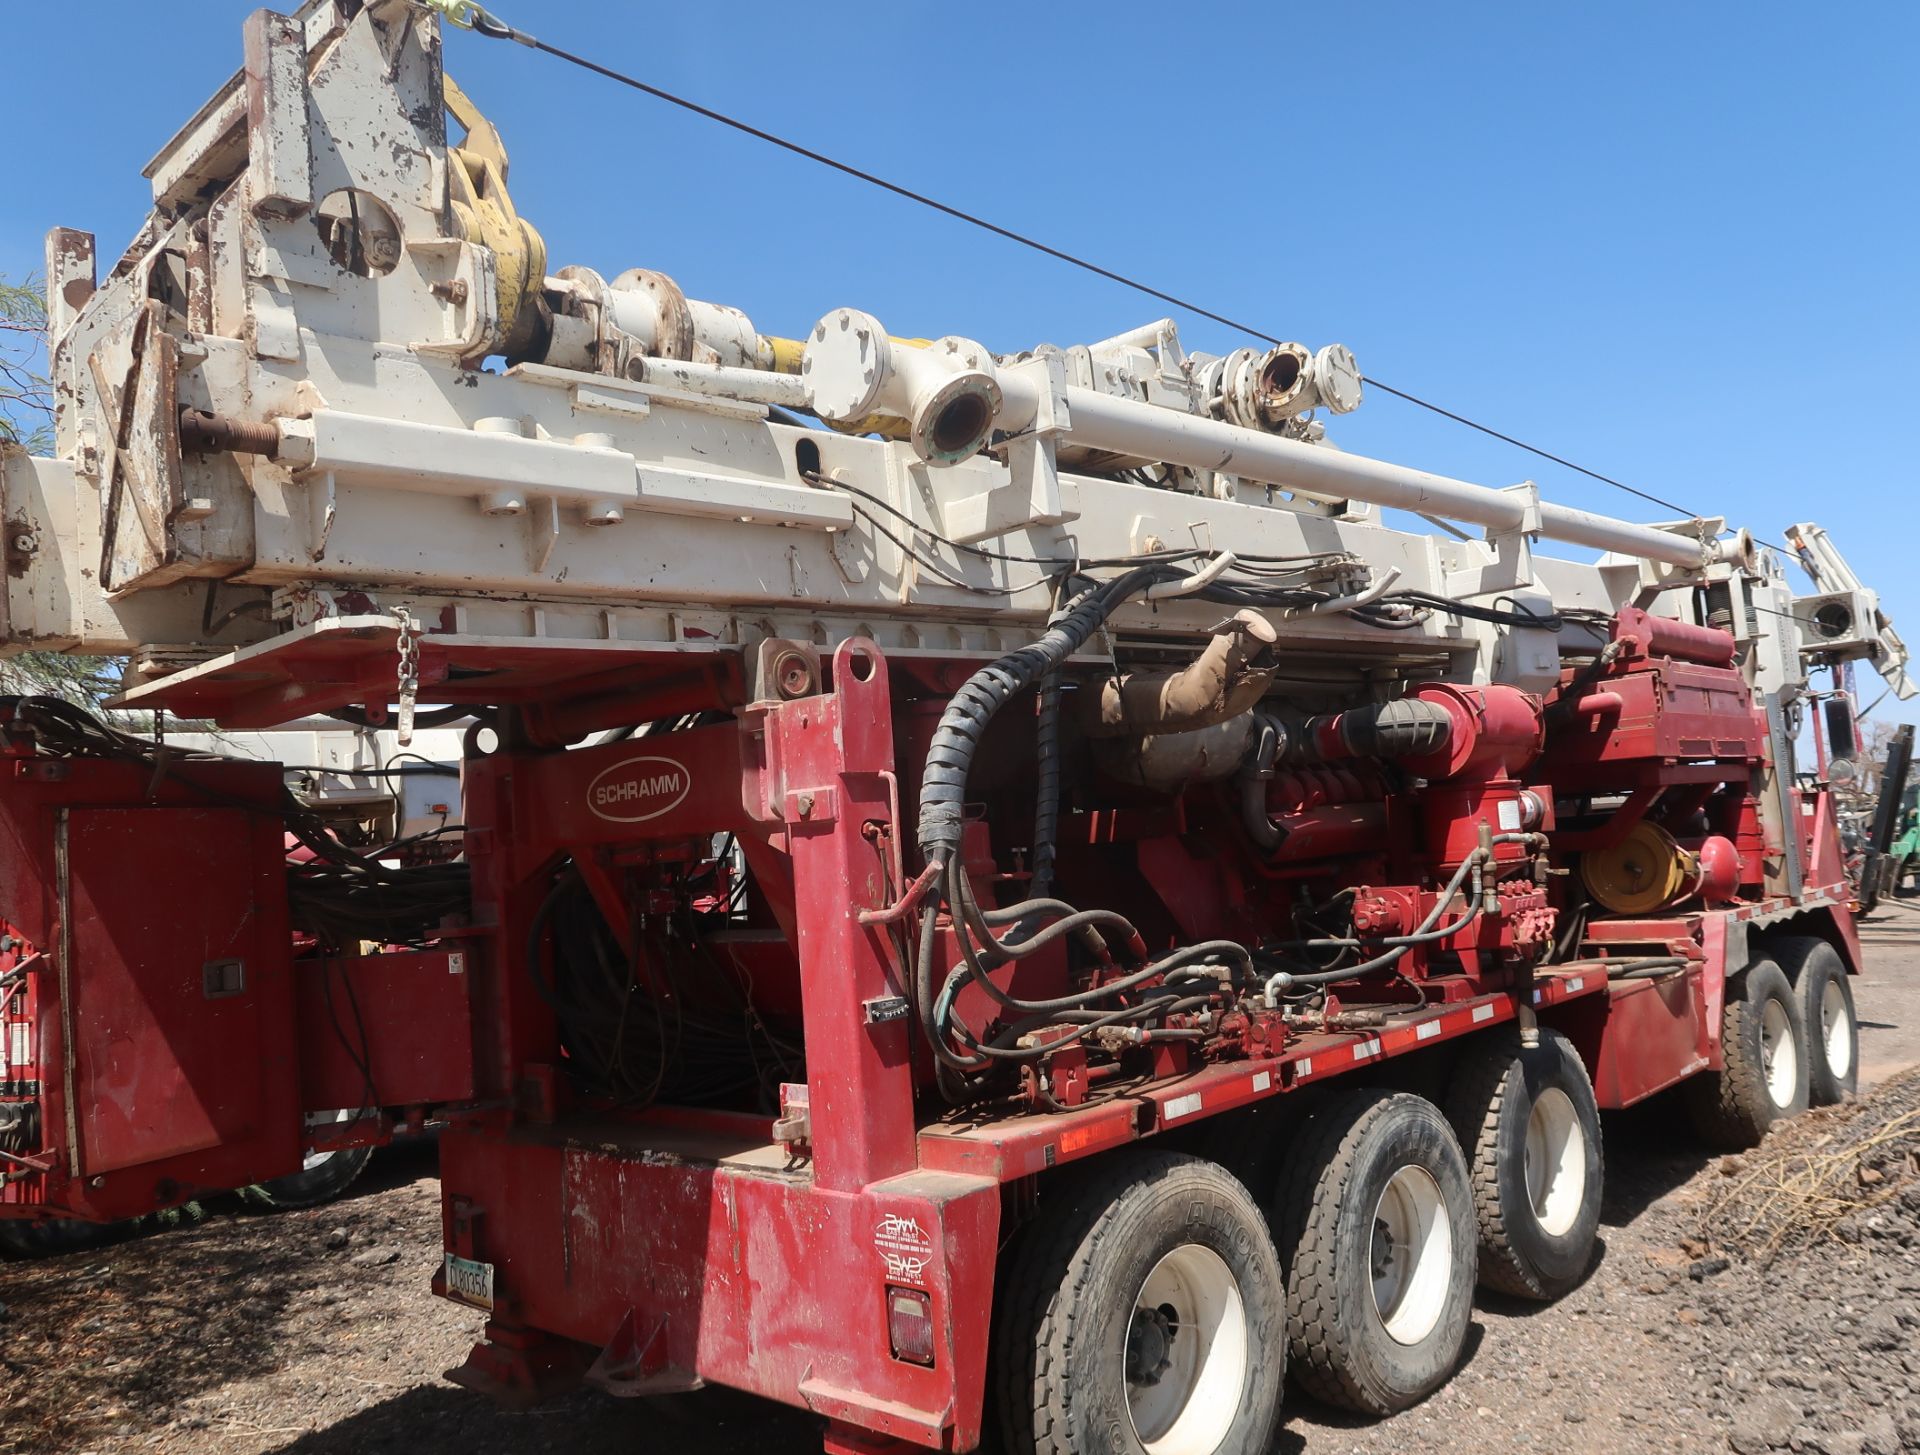 2006 SCHRAMM T-130XD DRILL RIG, SN. J130-0135 MOUNTED ON CRANE CARRIER, VIN. 1CYDGV6846T046987 - Image 11 of 18